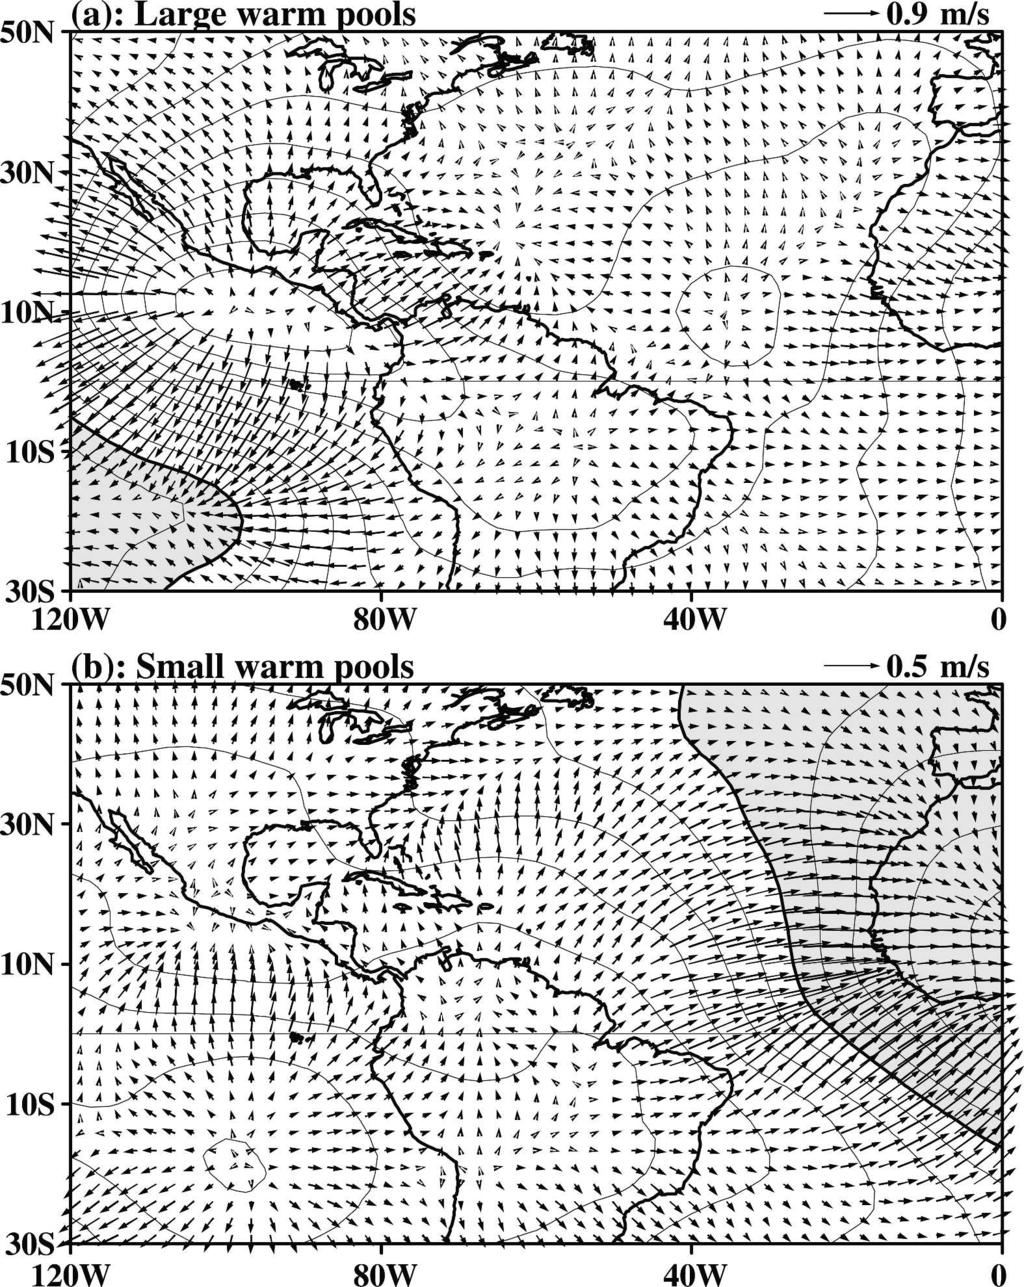 15 JUNE 2006 W A N G E T A L. 3021 FIG. 9. Composites of the 200-mb velocity potential and divergent wind anomalies during ASO for (a) large and (b) small Atlantic warm pools. 0.43.